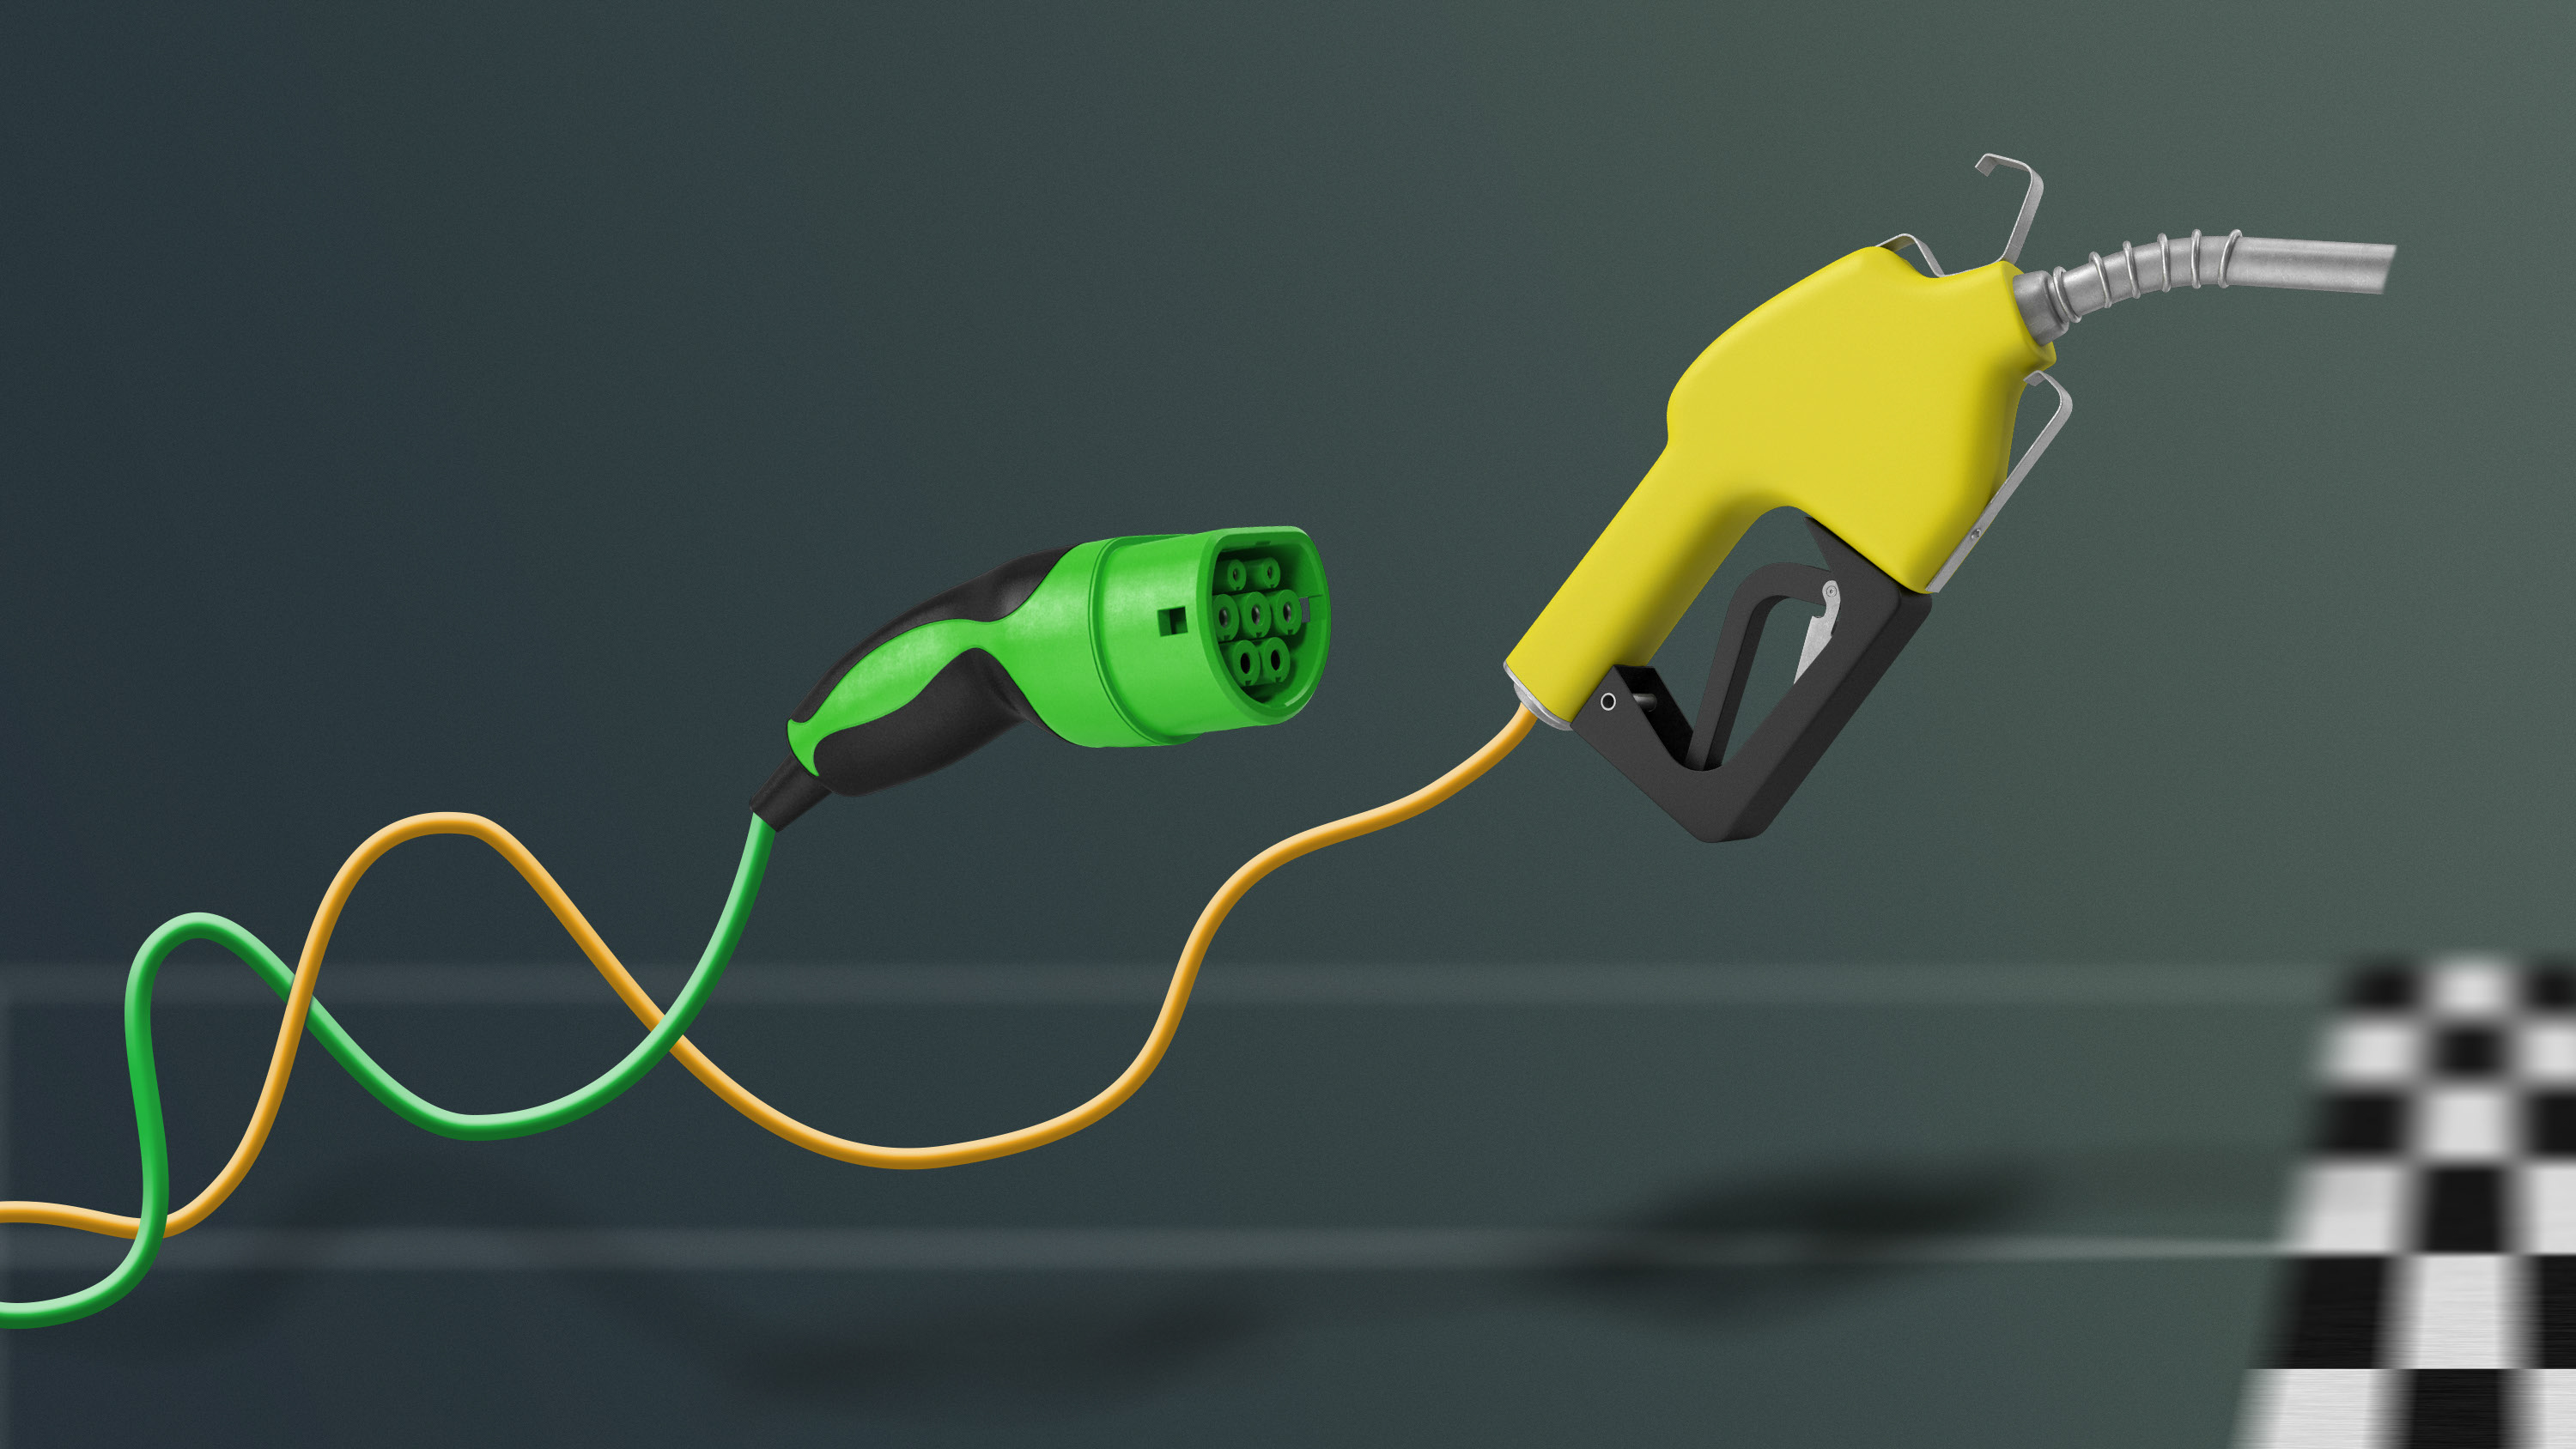 The latest technology in the automotive field - Electric Vehicles (EVs) and Hybrid Technology